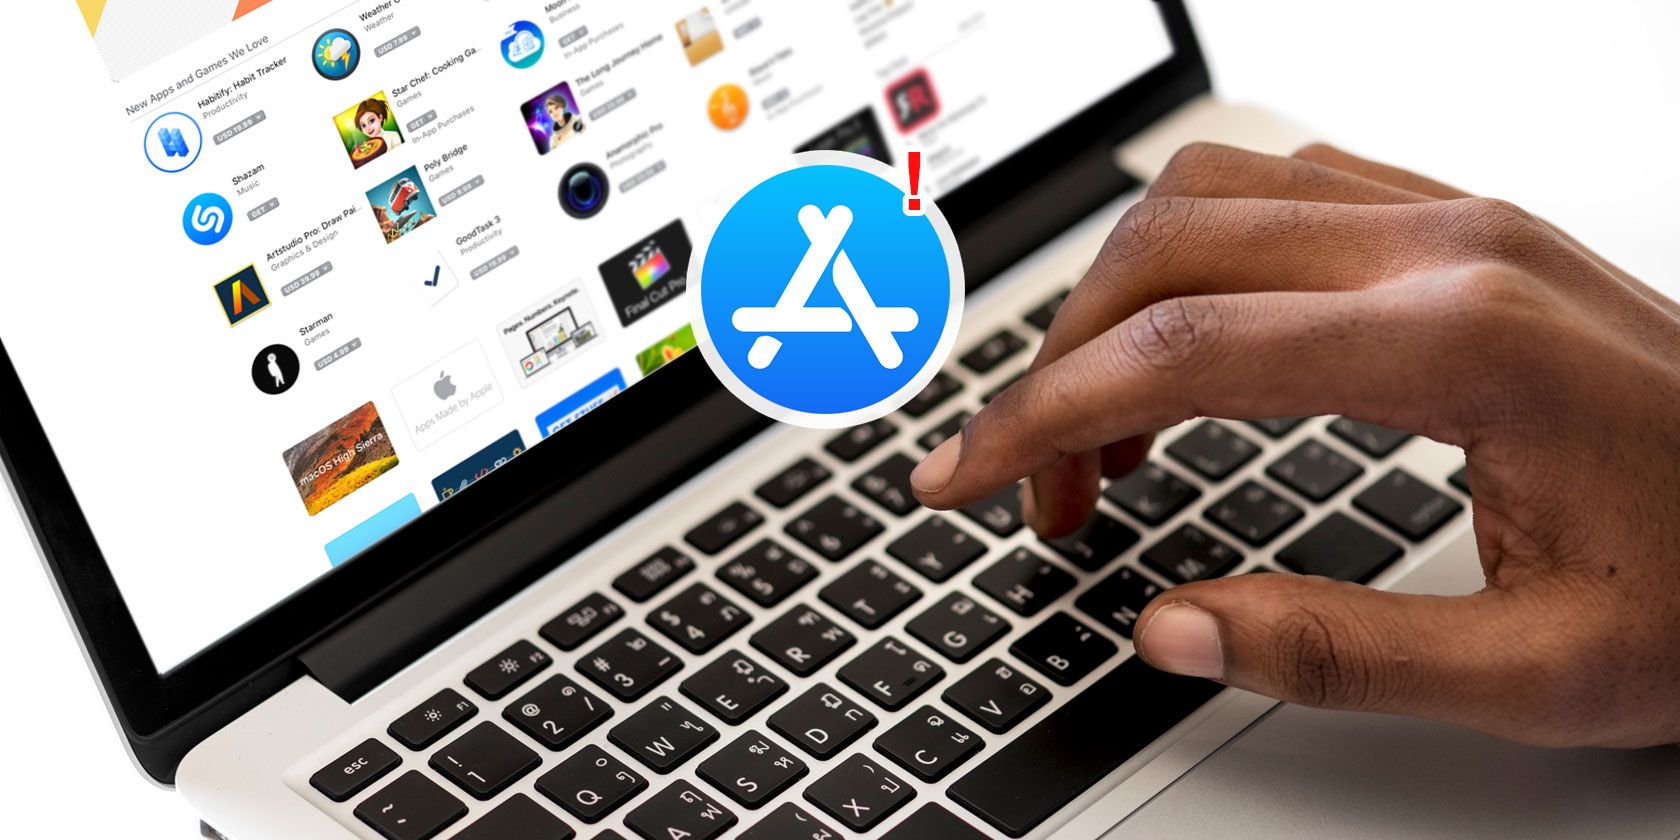 app store software for mac